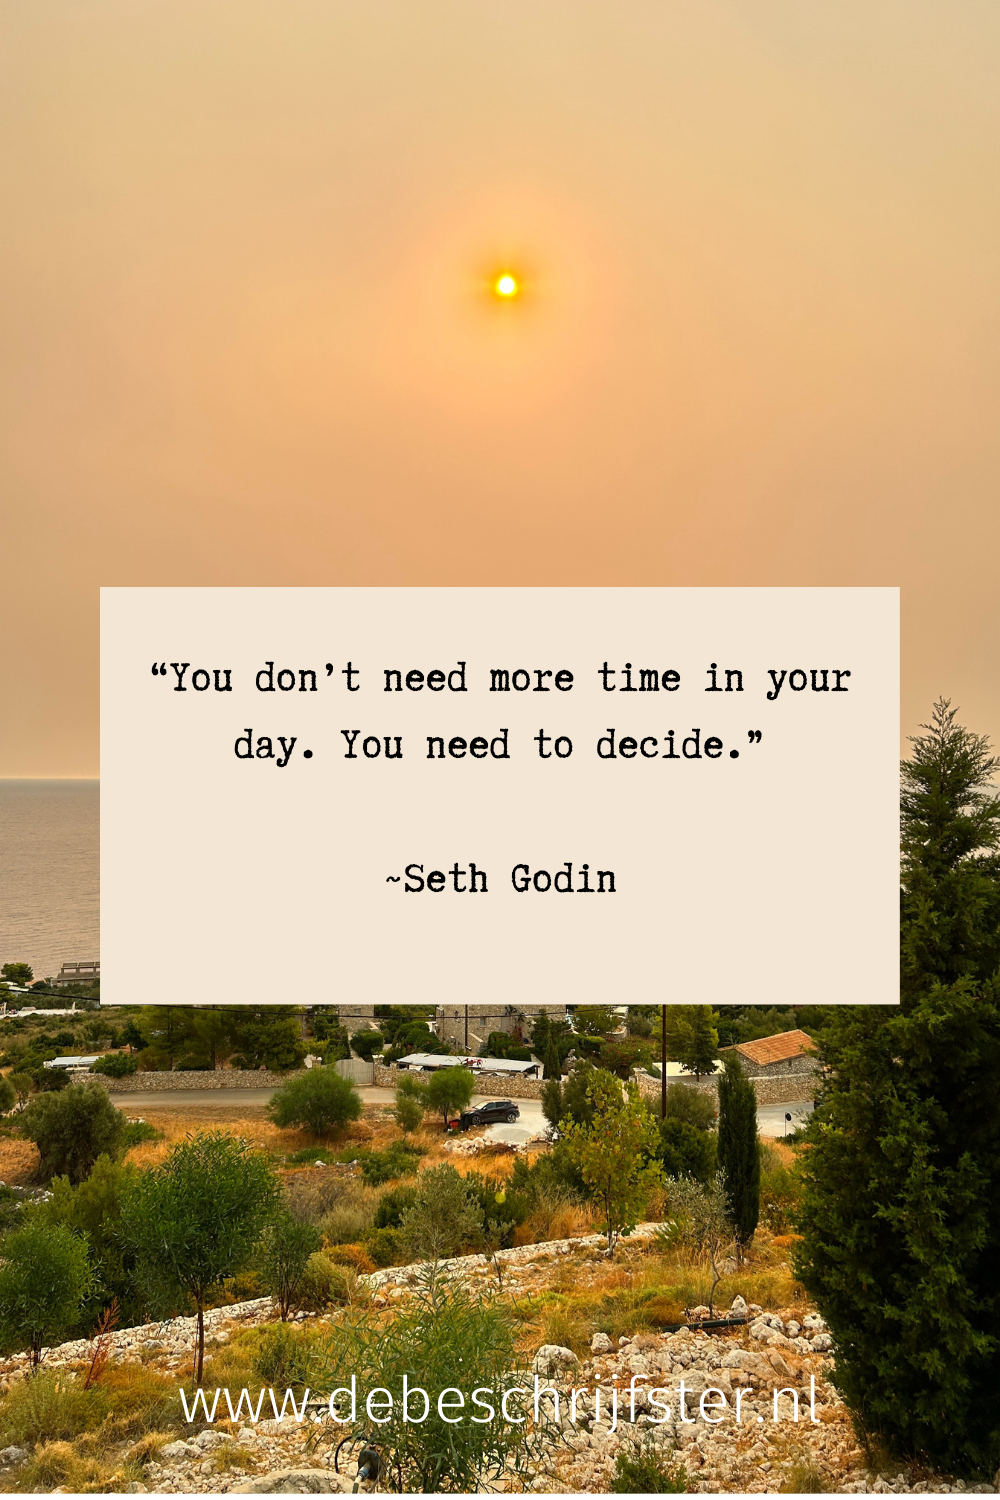 “You don’t need more time in your day. You need to decide”. Seth Godin